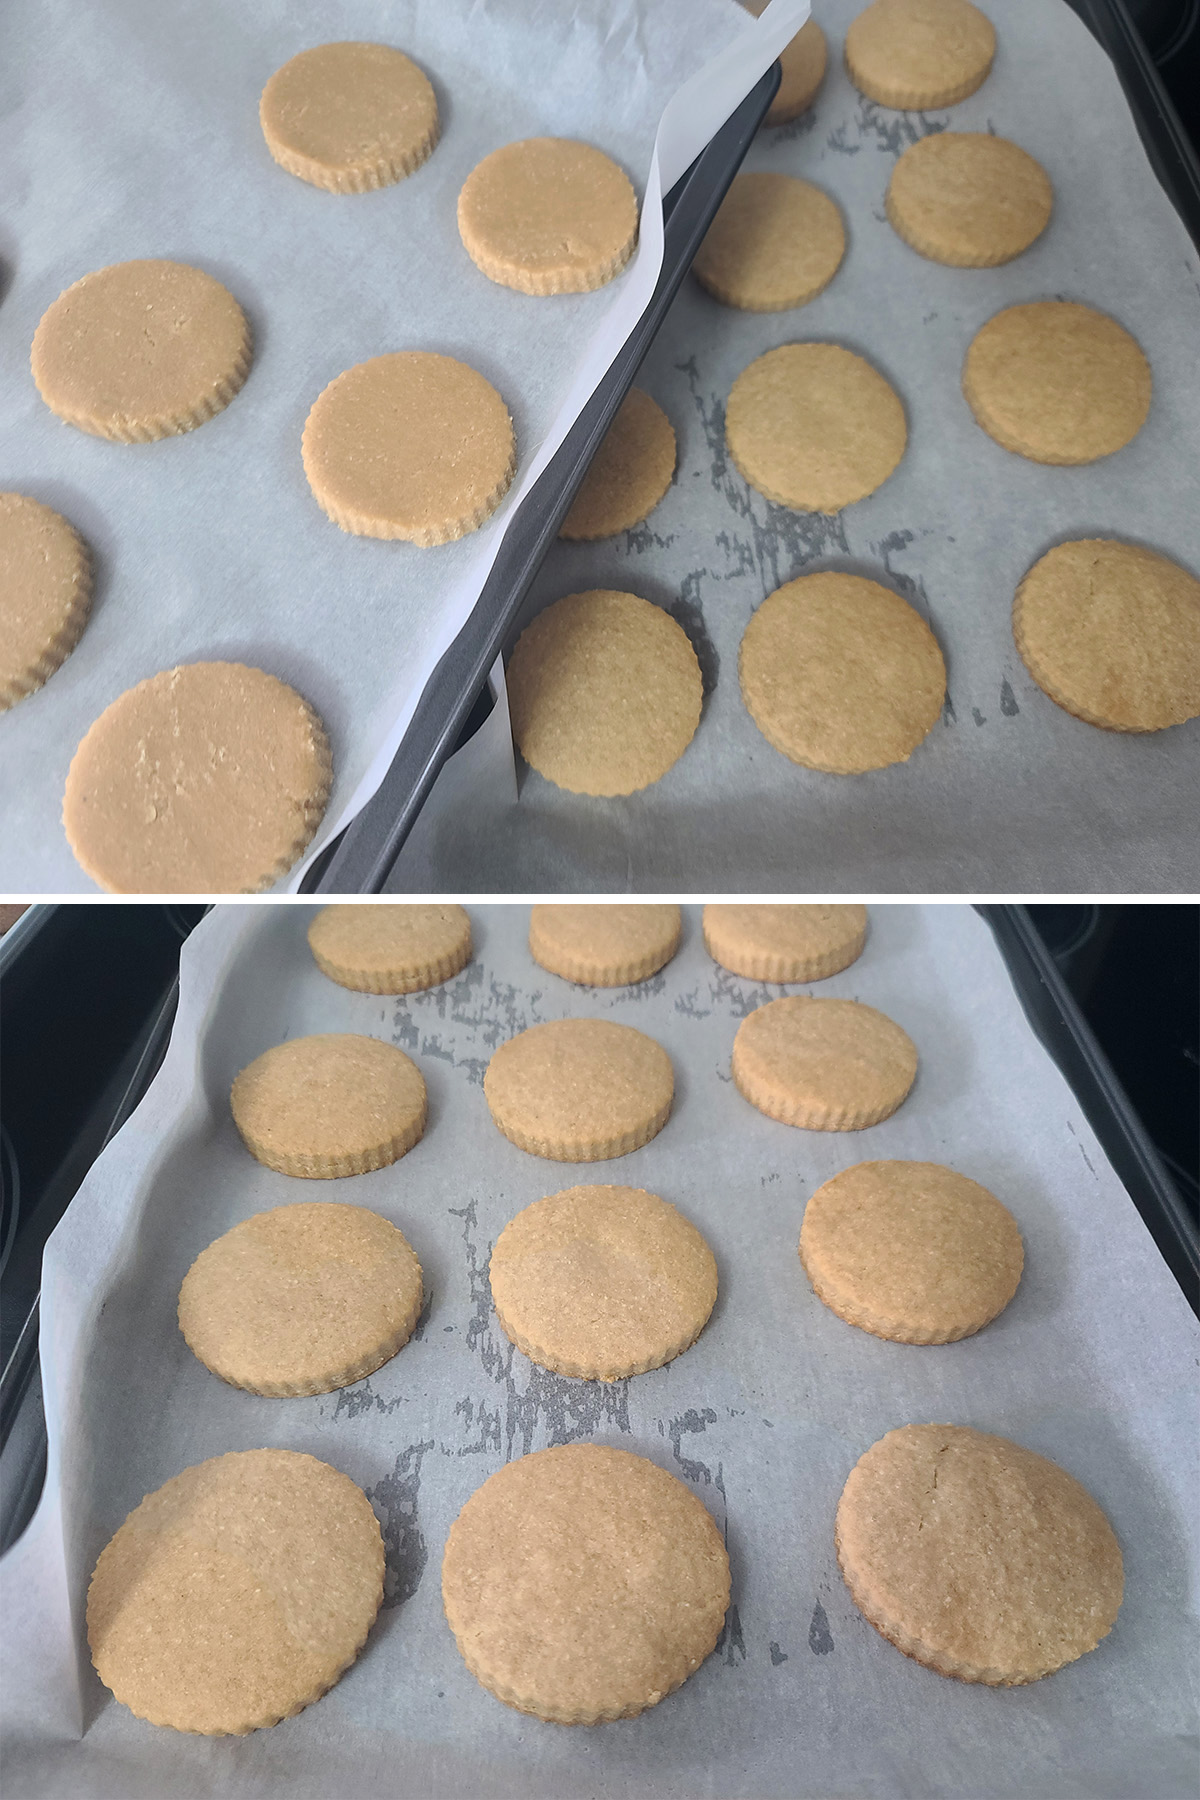 A 2 part image showing a pan of gluten free shortbread cookies, before and after being baked.